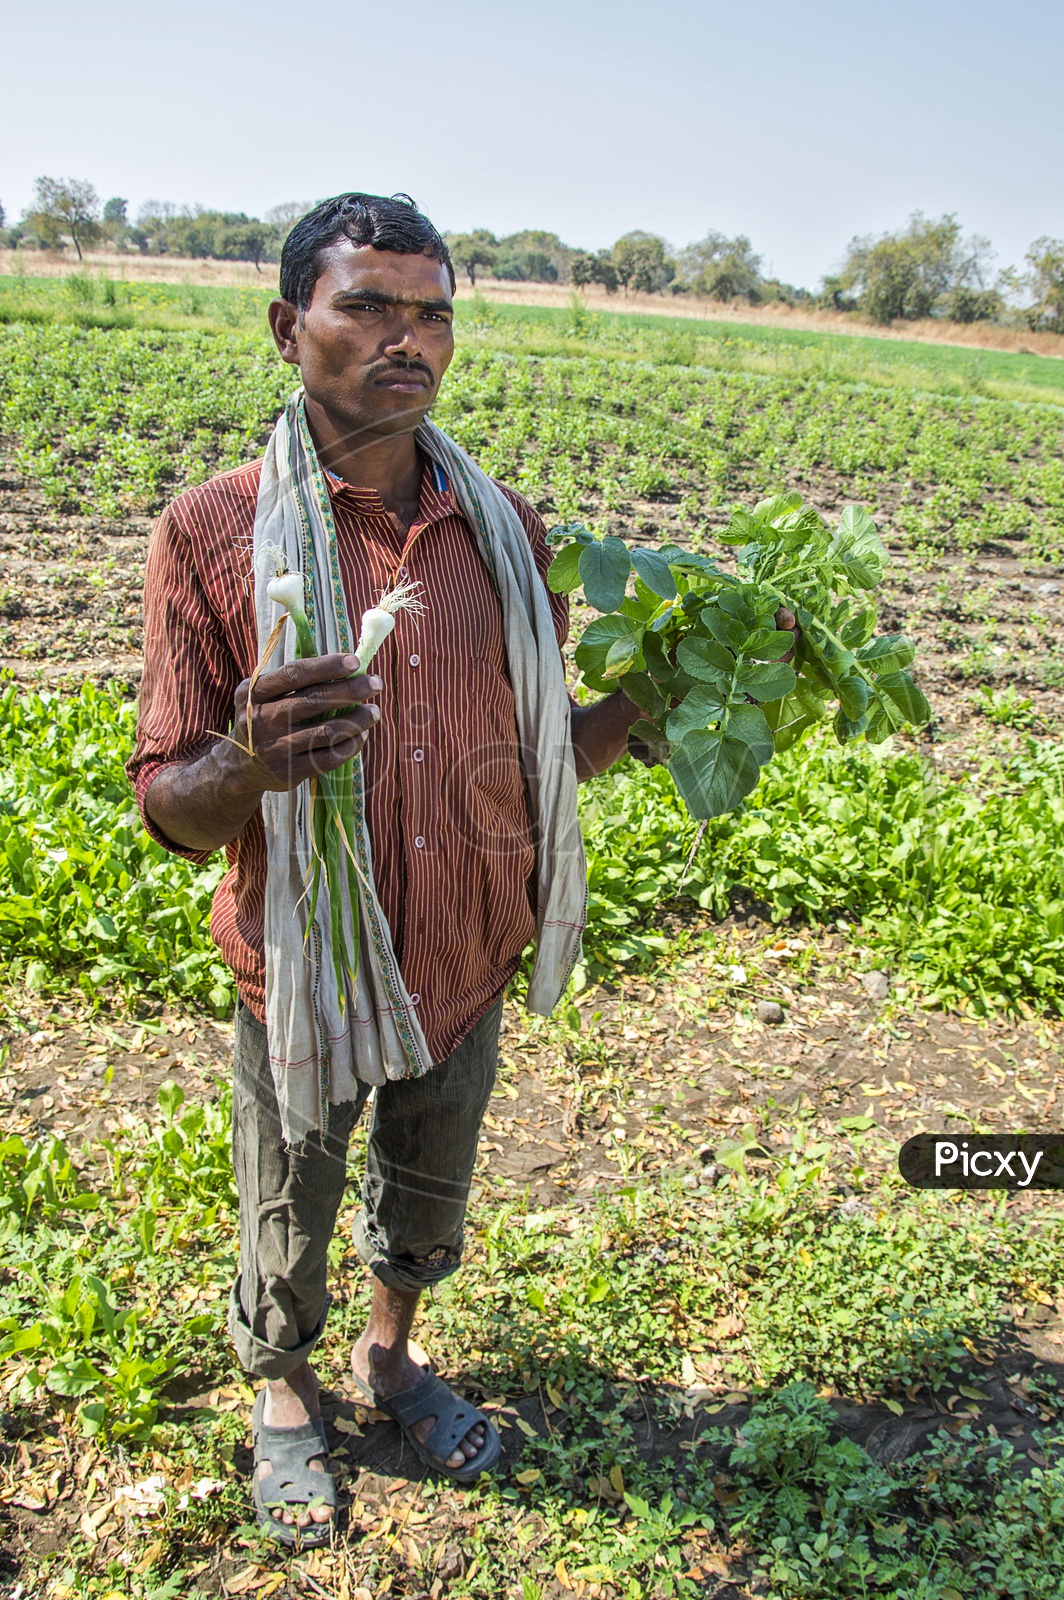 An Indian Farmer With Freshly Picked Radish Or Moolee Or Mullangi in Hands In an Organic Farm